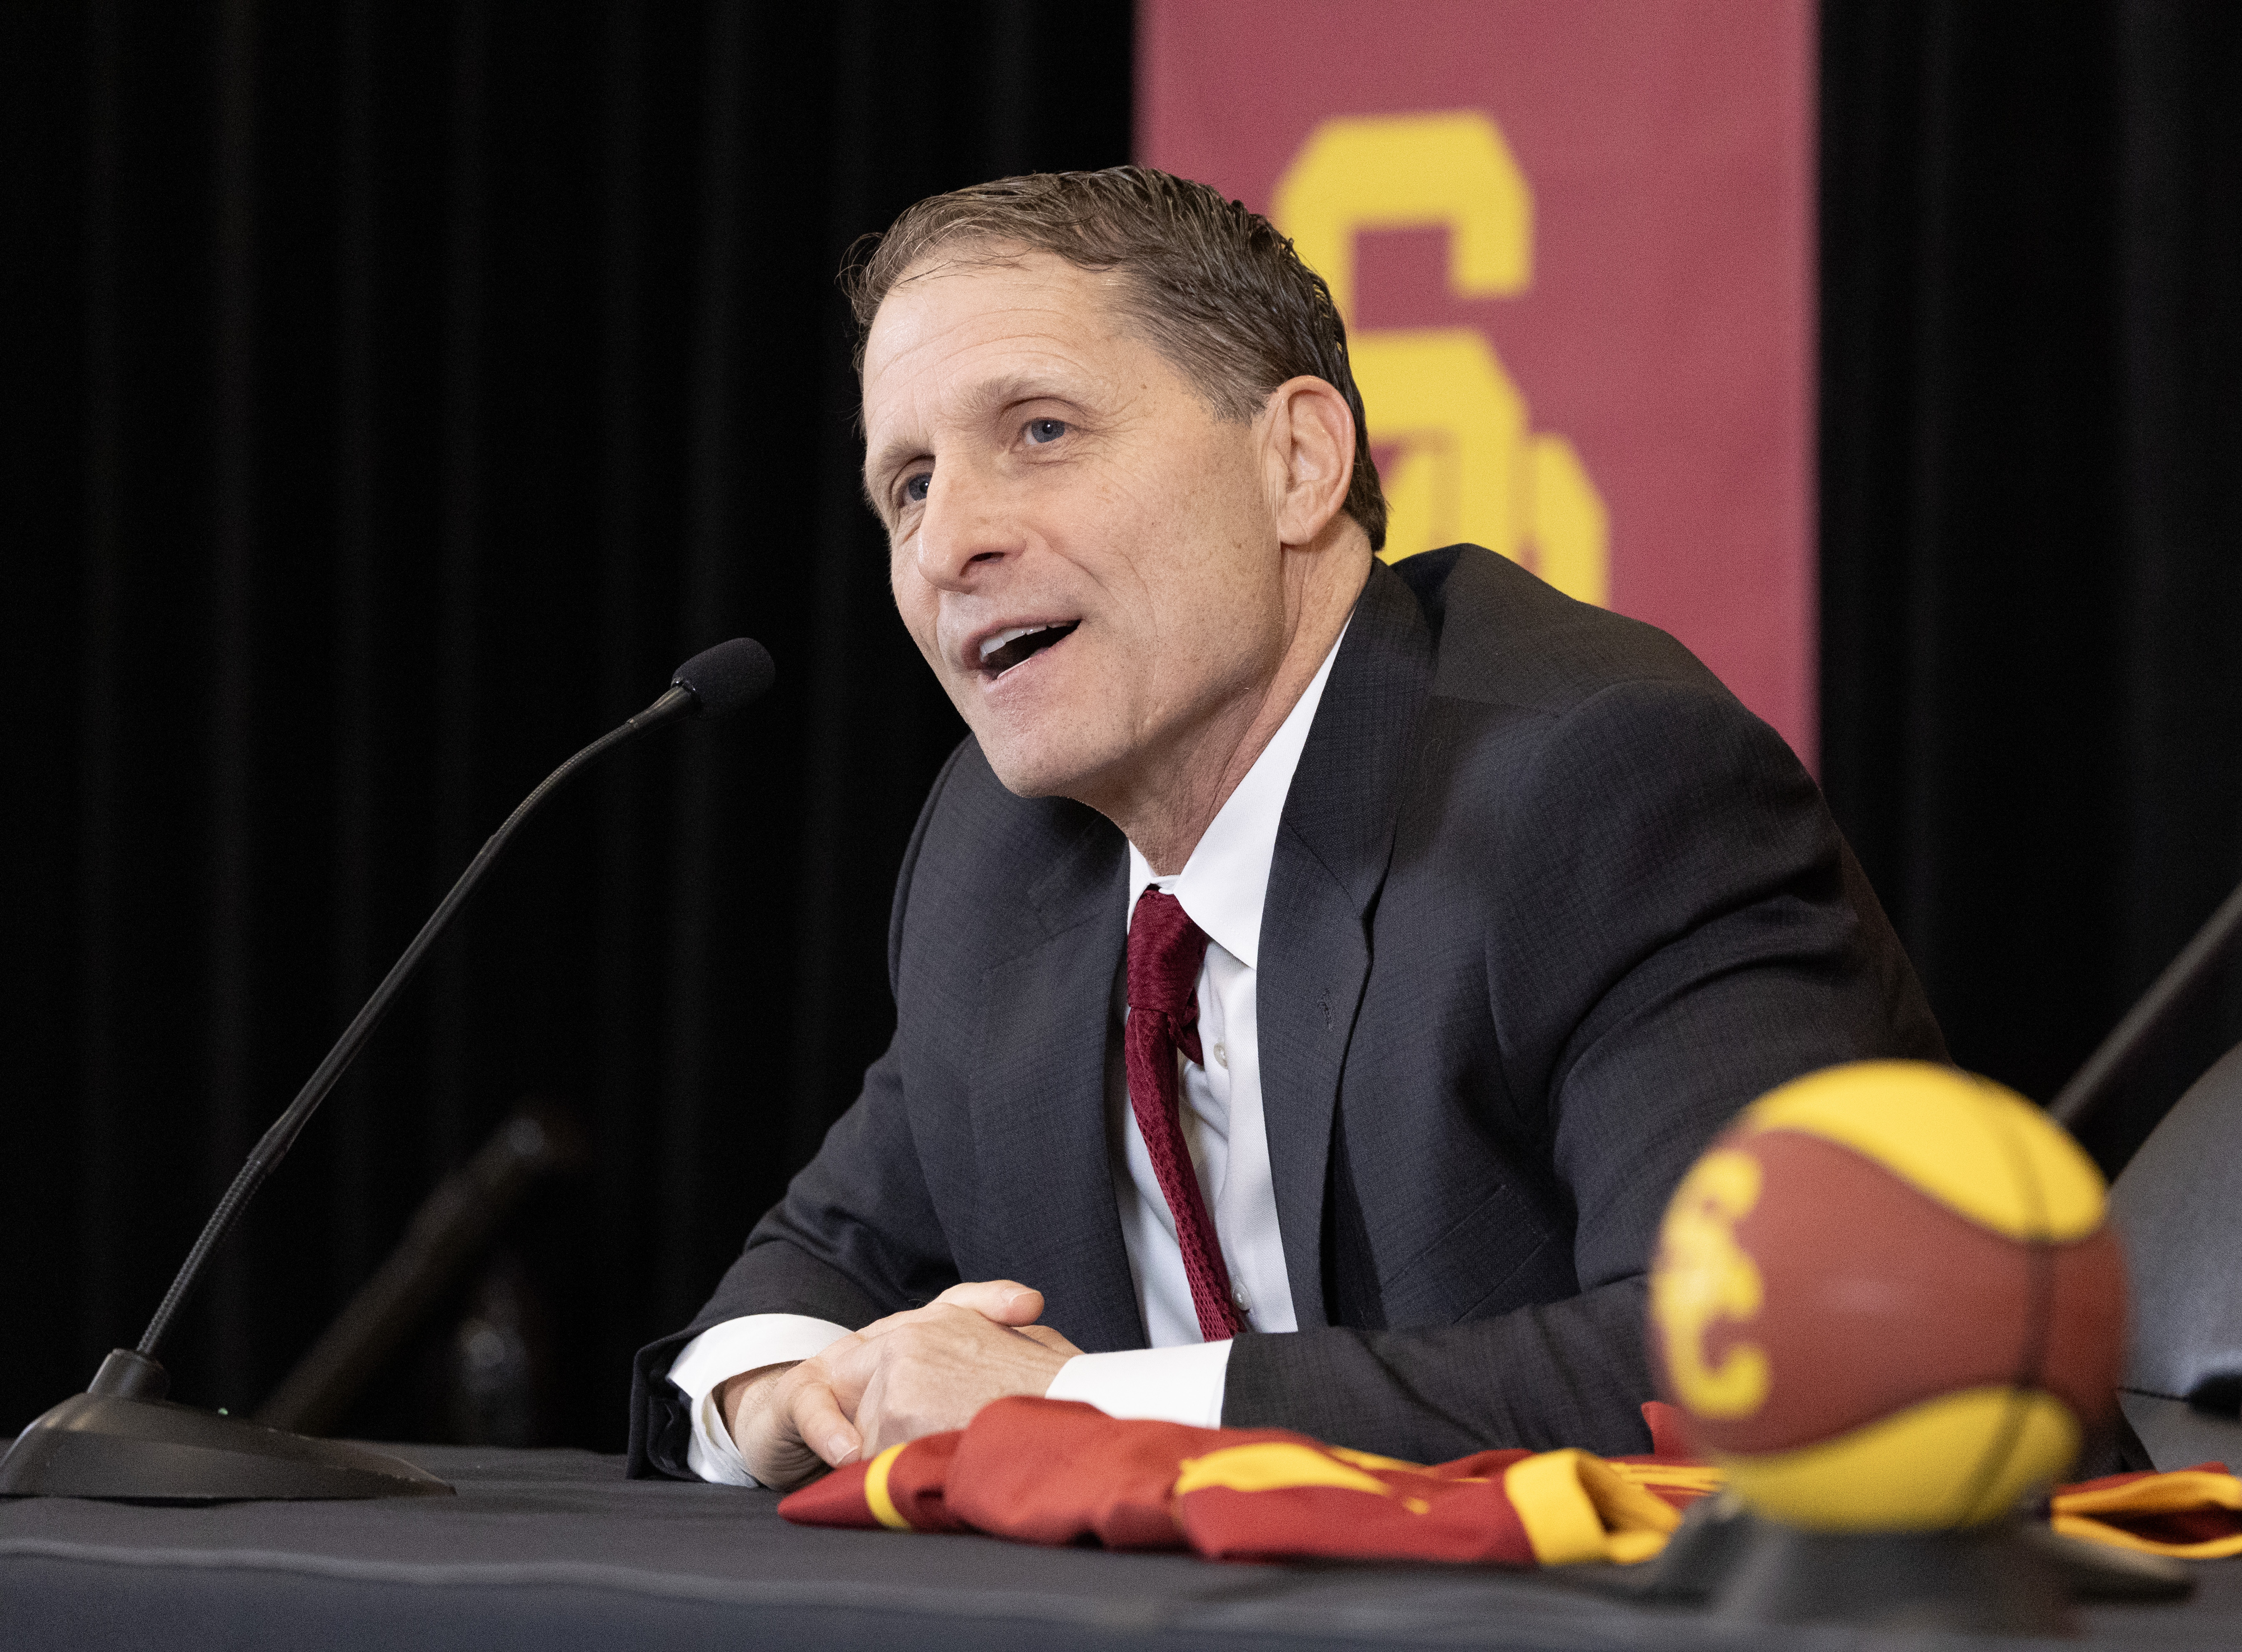 USC men's basketball coach Eric Musselman speaks during his introductory news conference in April.